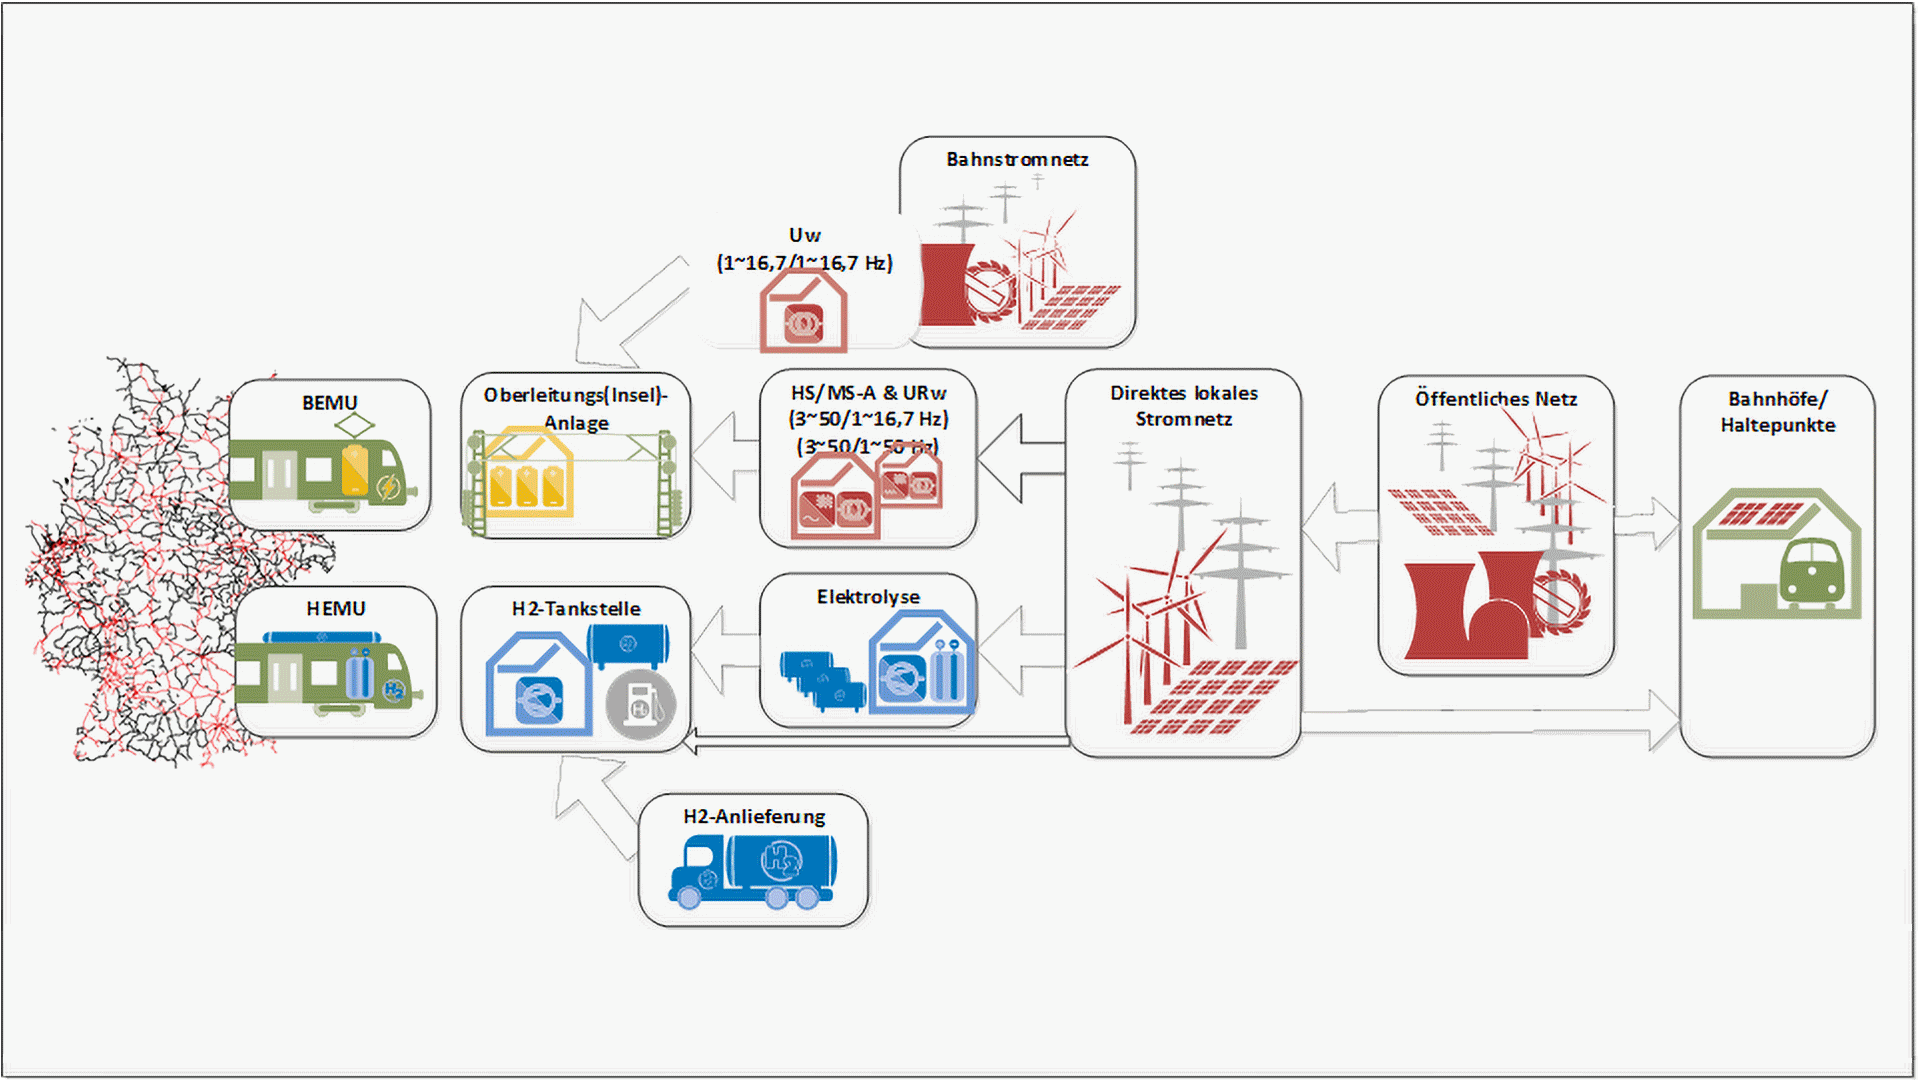 Infographic on the supply concept cycle